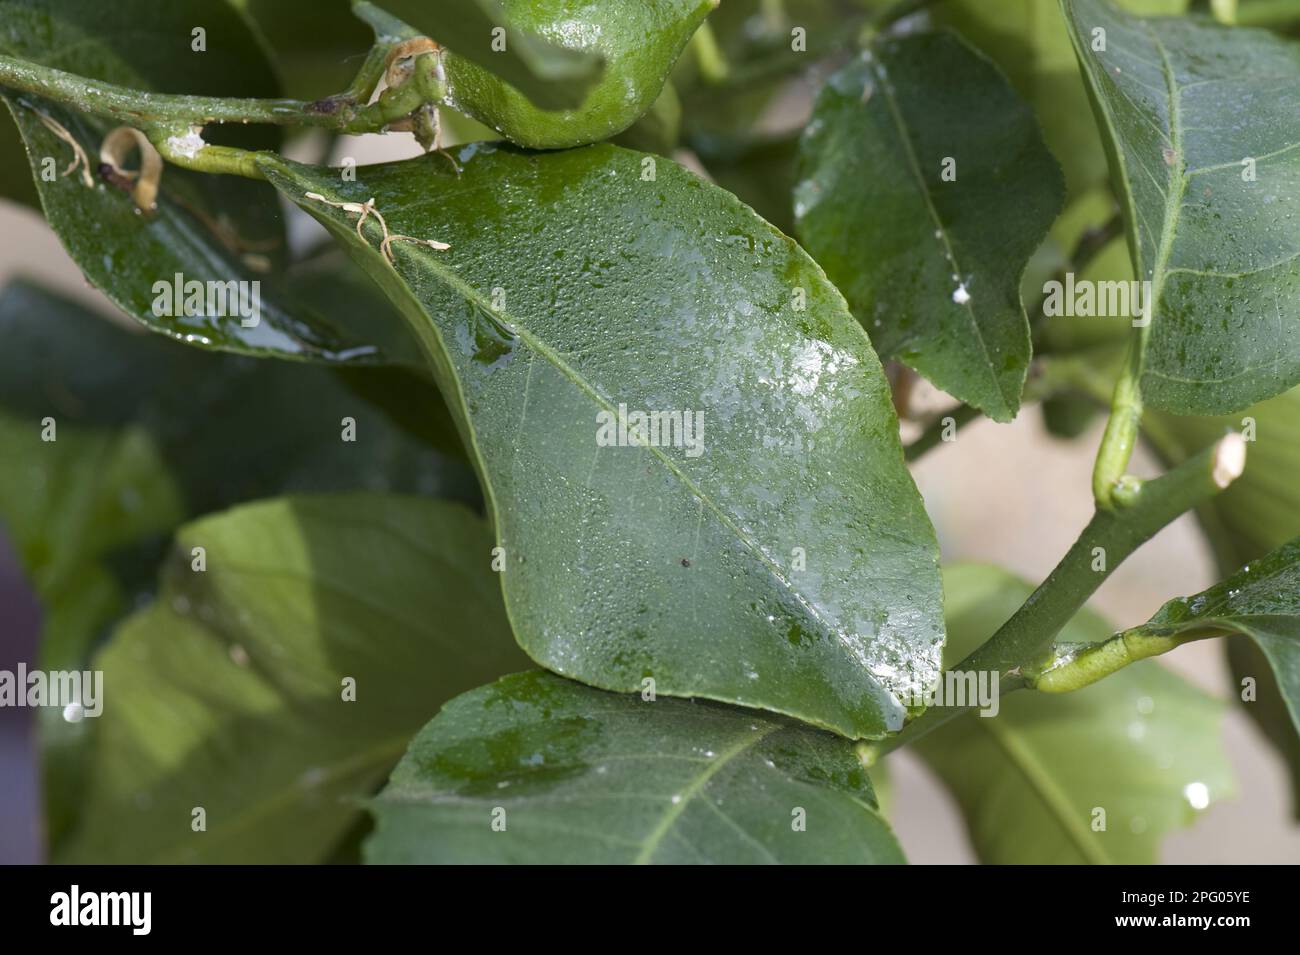 Greenhouse mealybug, Pseudococcus viburni, honeydew from an infestation on a lemon tree grown in the winter garden with fruits Stock Photo